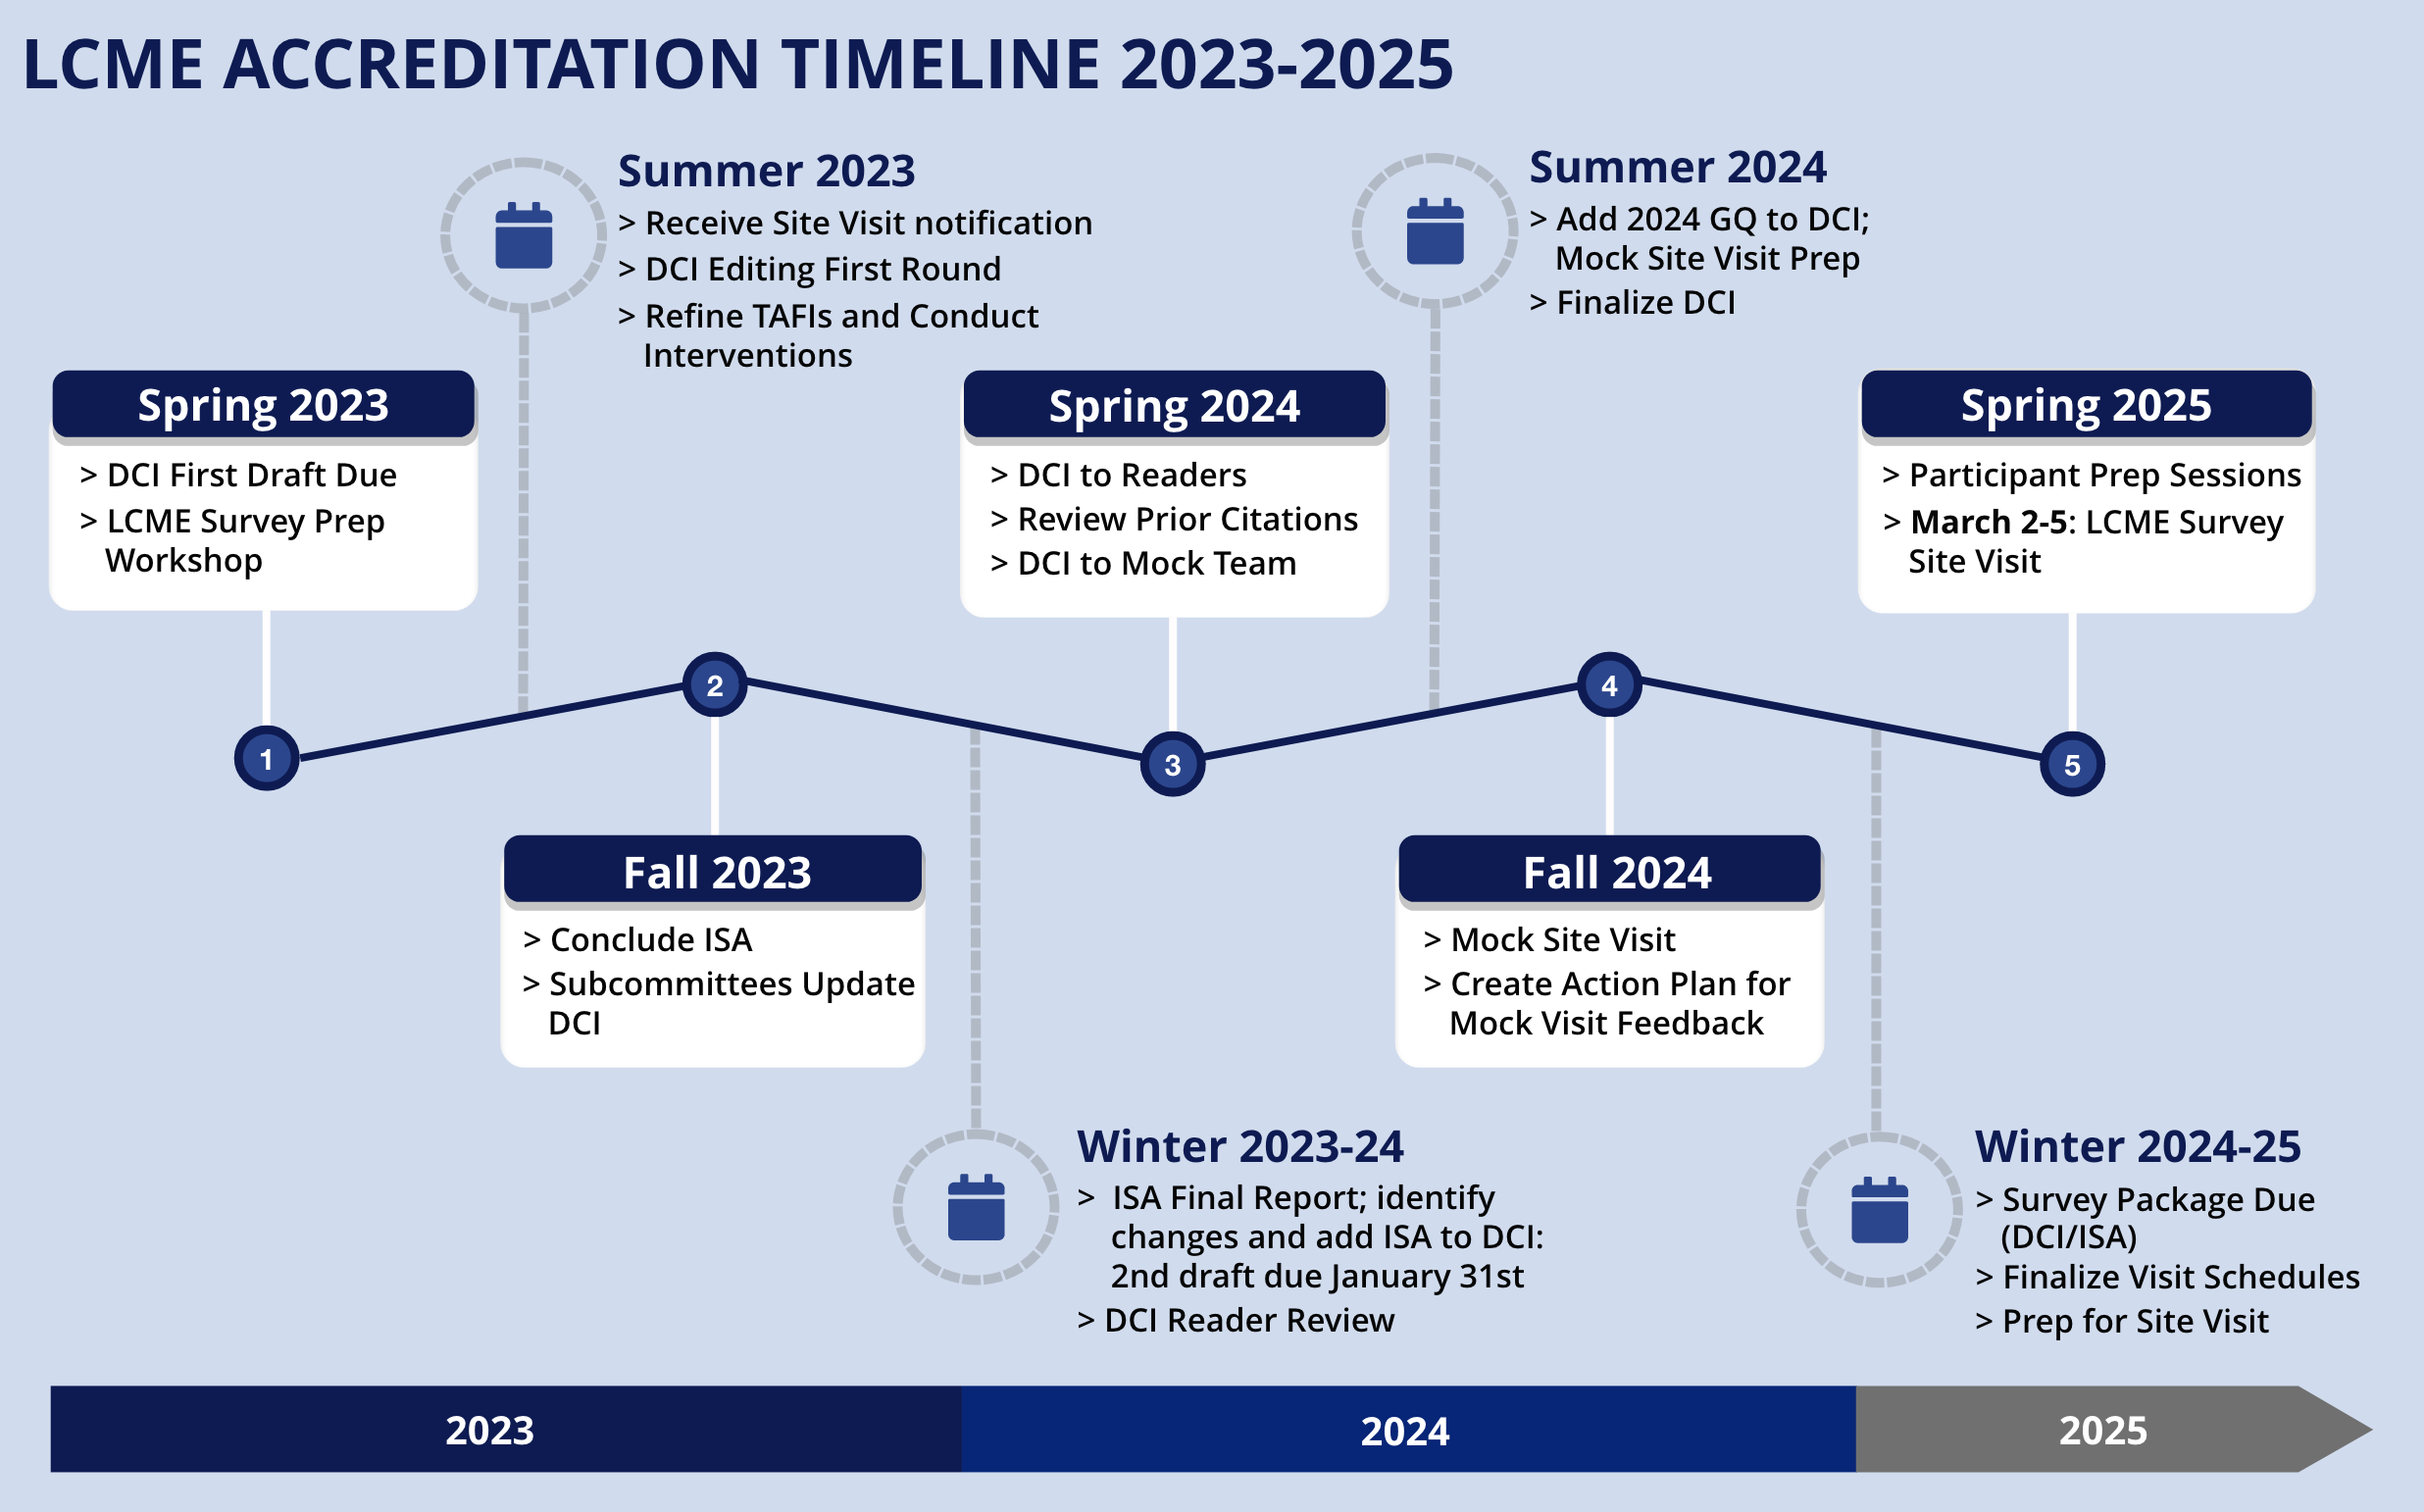 LCME ACCREDITATION TIMELINE 2023-2025